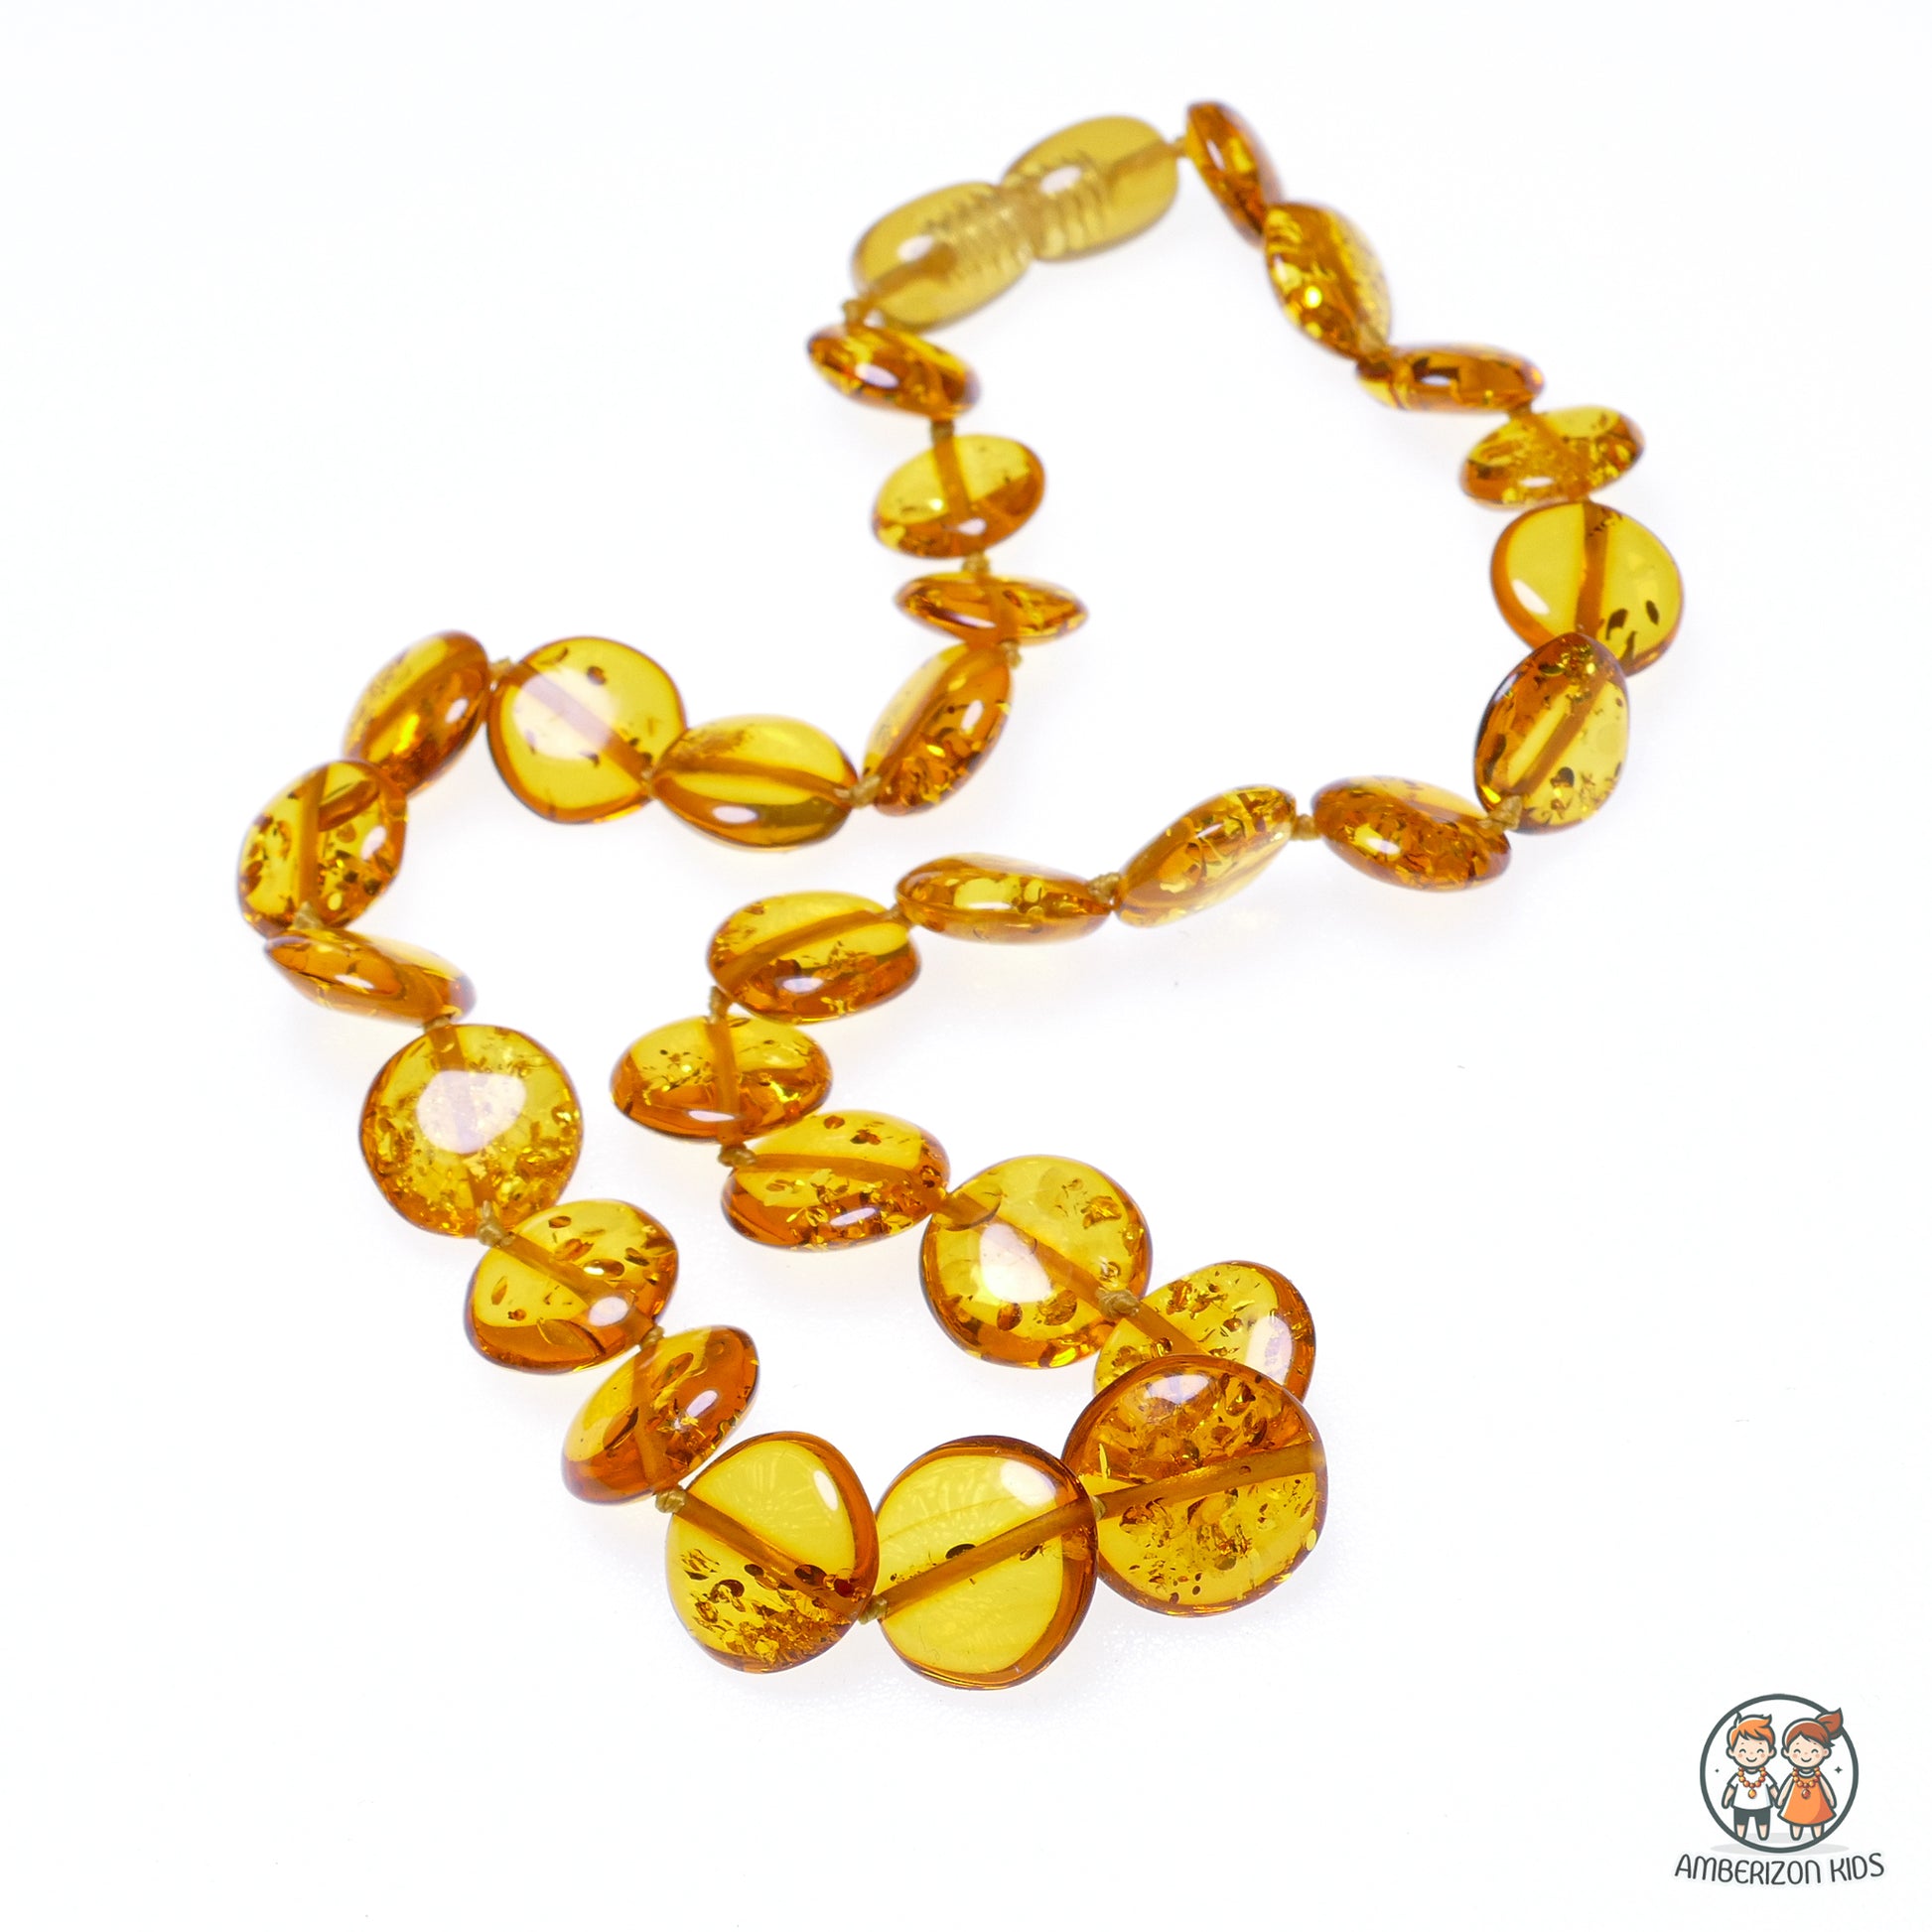 Baltic amber Baby necklace - Premium Tablet shape beads